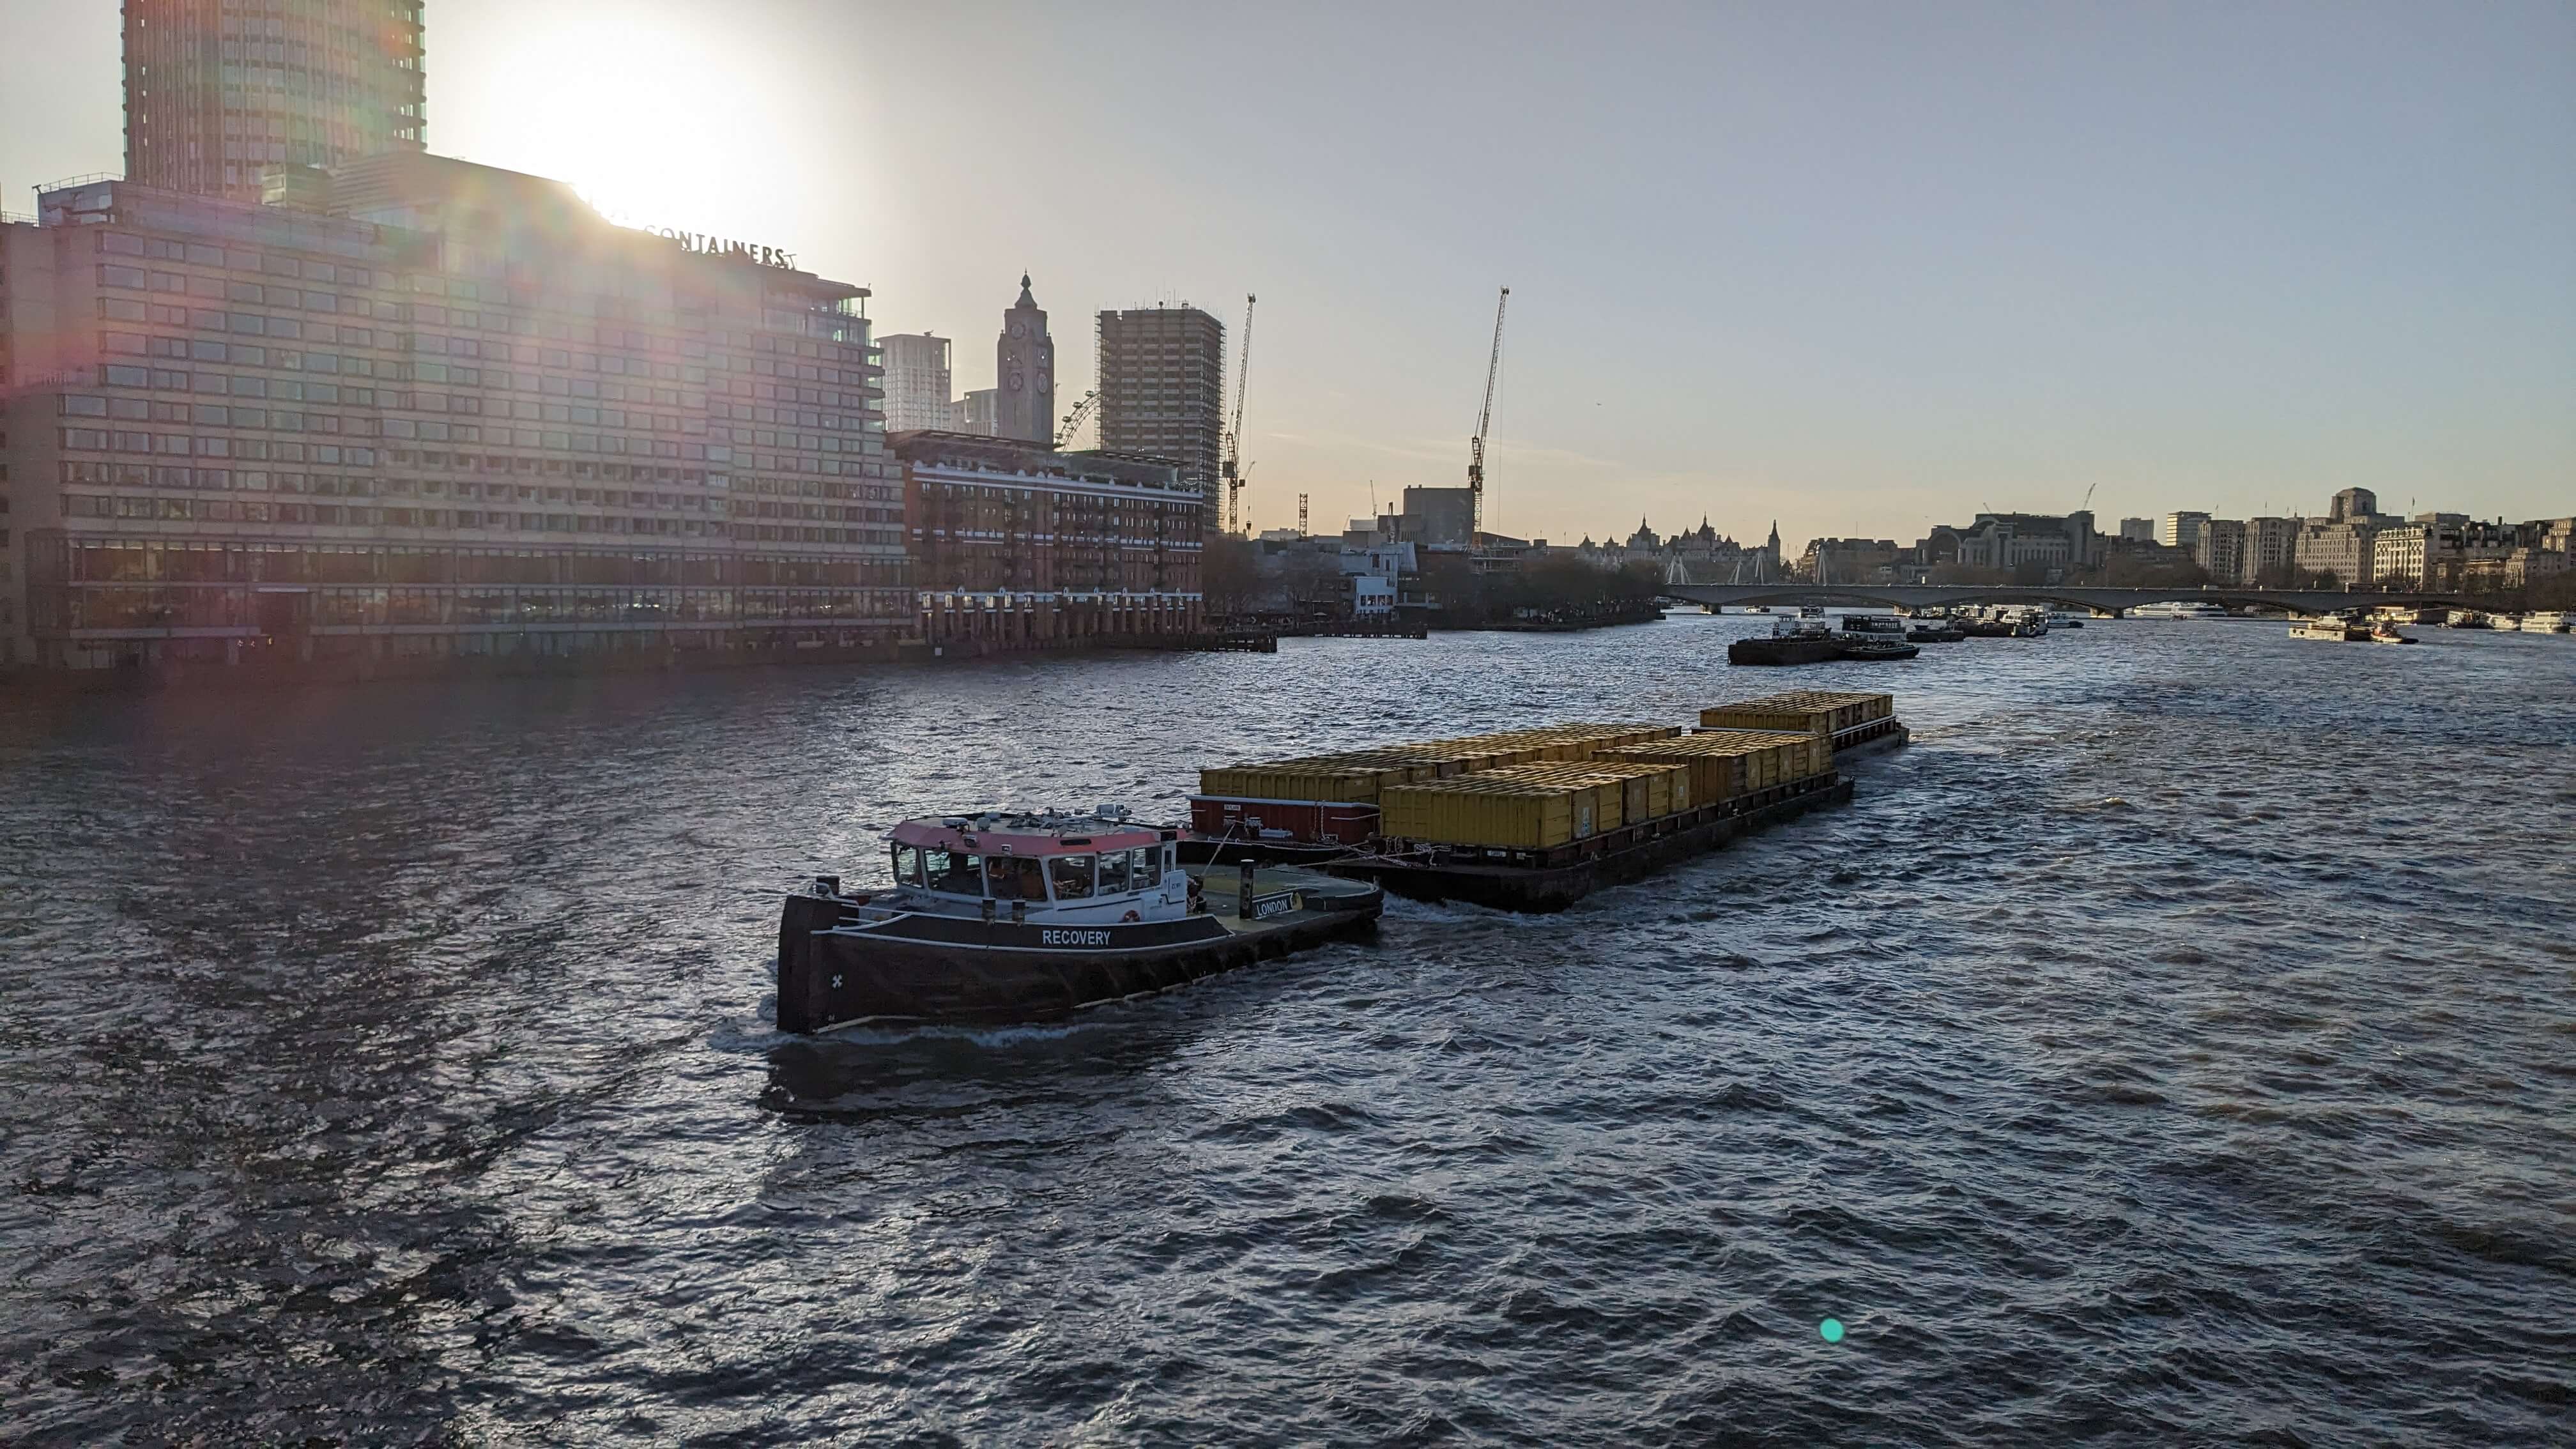 A boat on the river Thames, taken from Blackfriars Bridge facing westward. In the background are the south bank buildings and the sky is blue.